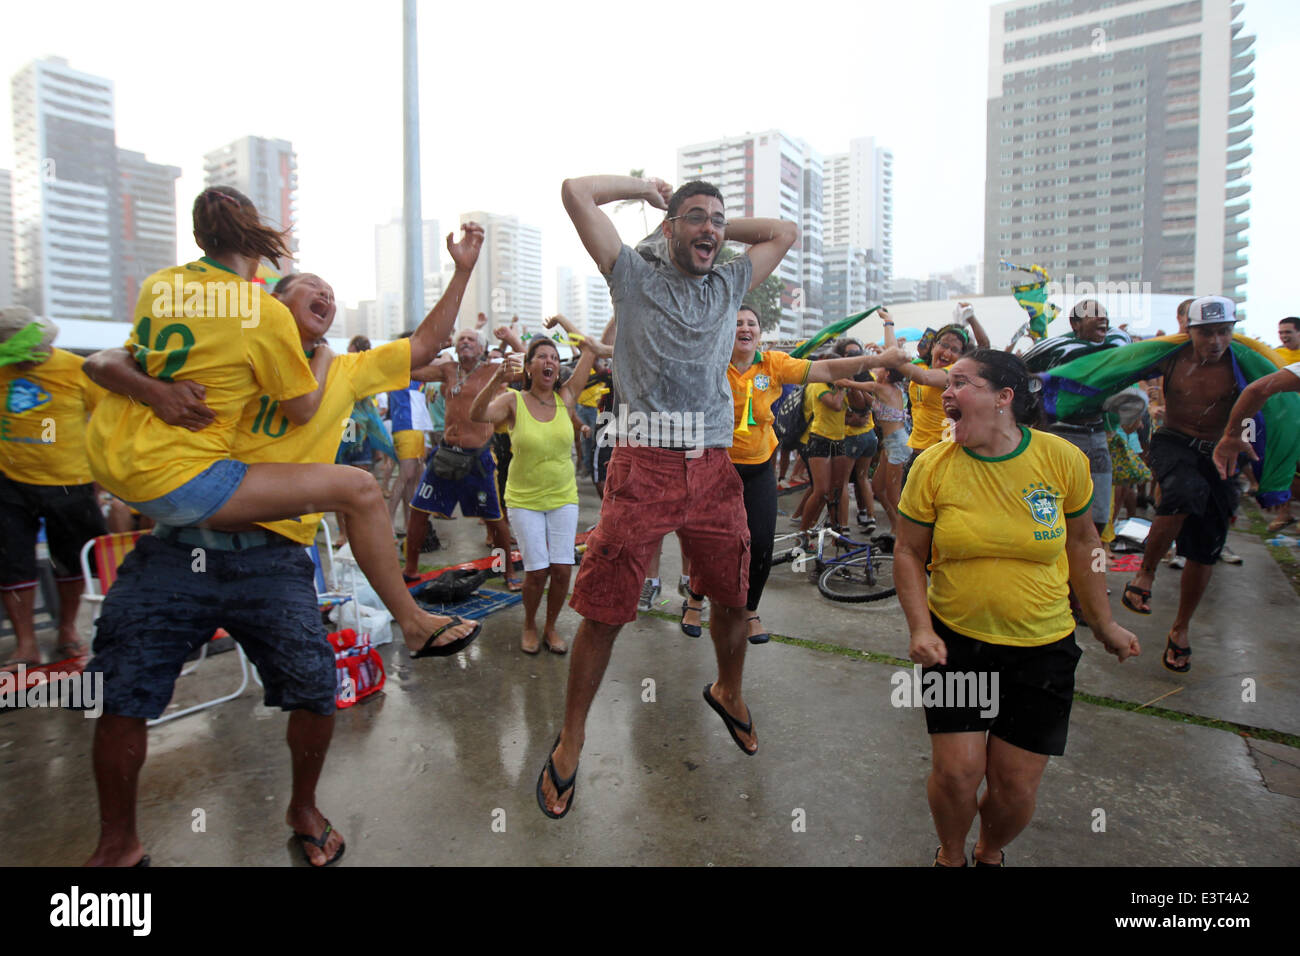 Recife, Brazil: 28 june 2014. Football / Soccer: Brazil World Cup 2014 quarter. World Cup Brazil 2014:  Brazilian people  celebrates in the recife square the victory Brazilian team in the match Brazil vs Chile played in Belo Horizonte  (photo: Marco Iacobucci/Alamy live news) Stock Photo